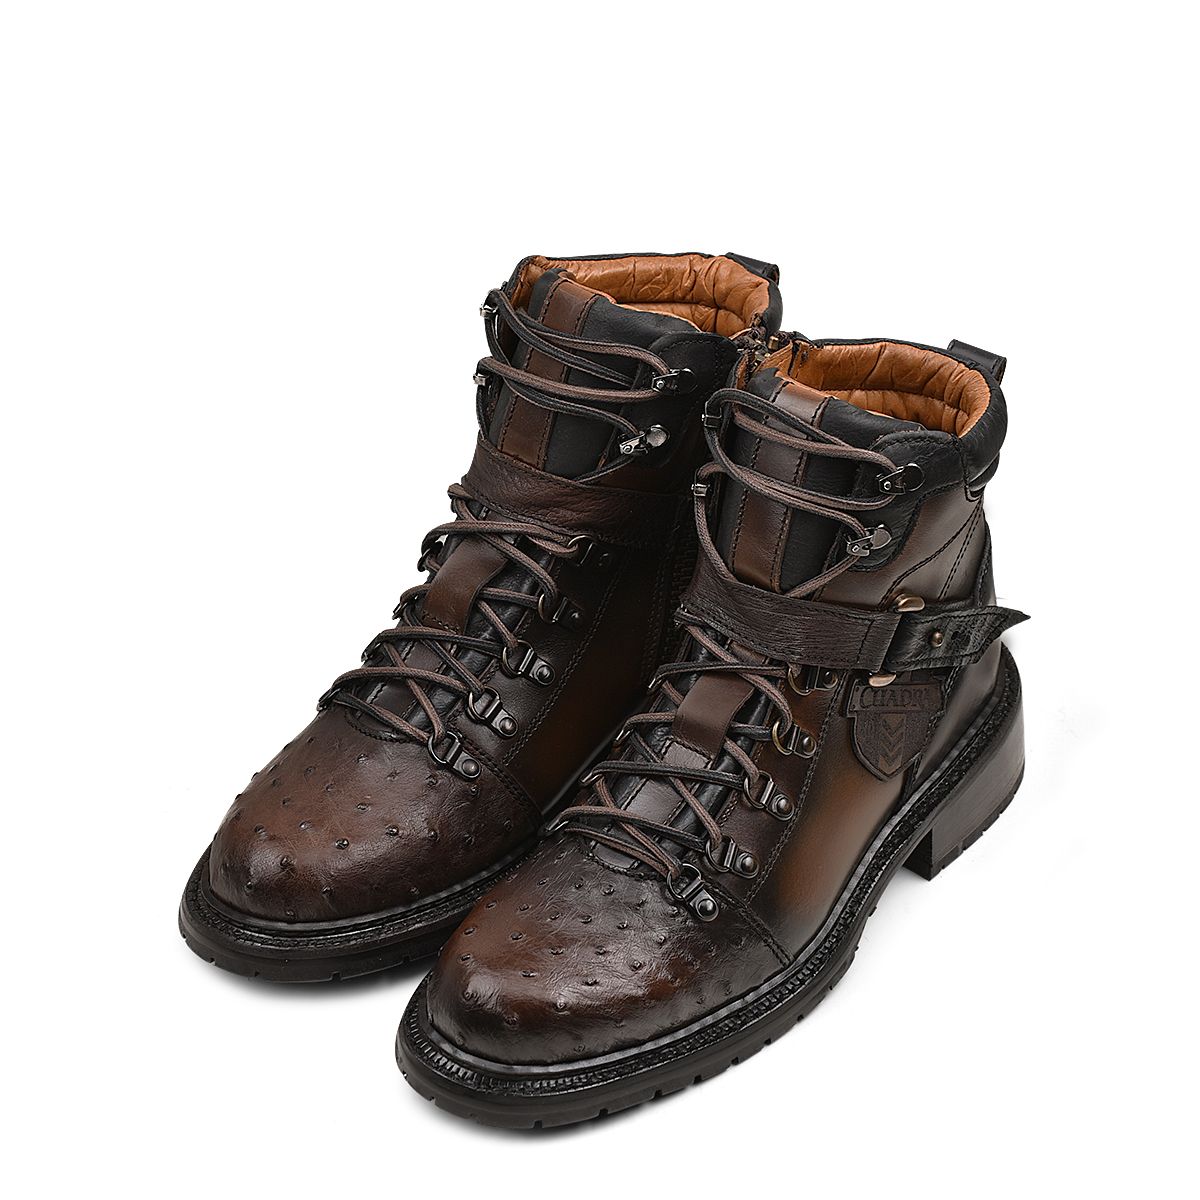 4J08A3 - Cuadra tobacco casual vintage fashion ostrich ankle booties for men-CUADRA-Kuet-Cuadra-Boots